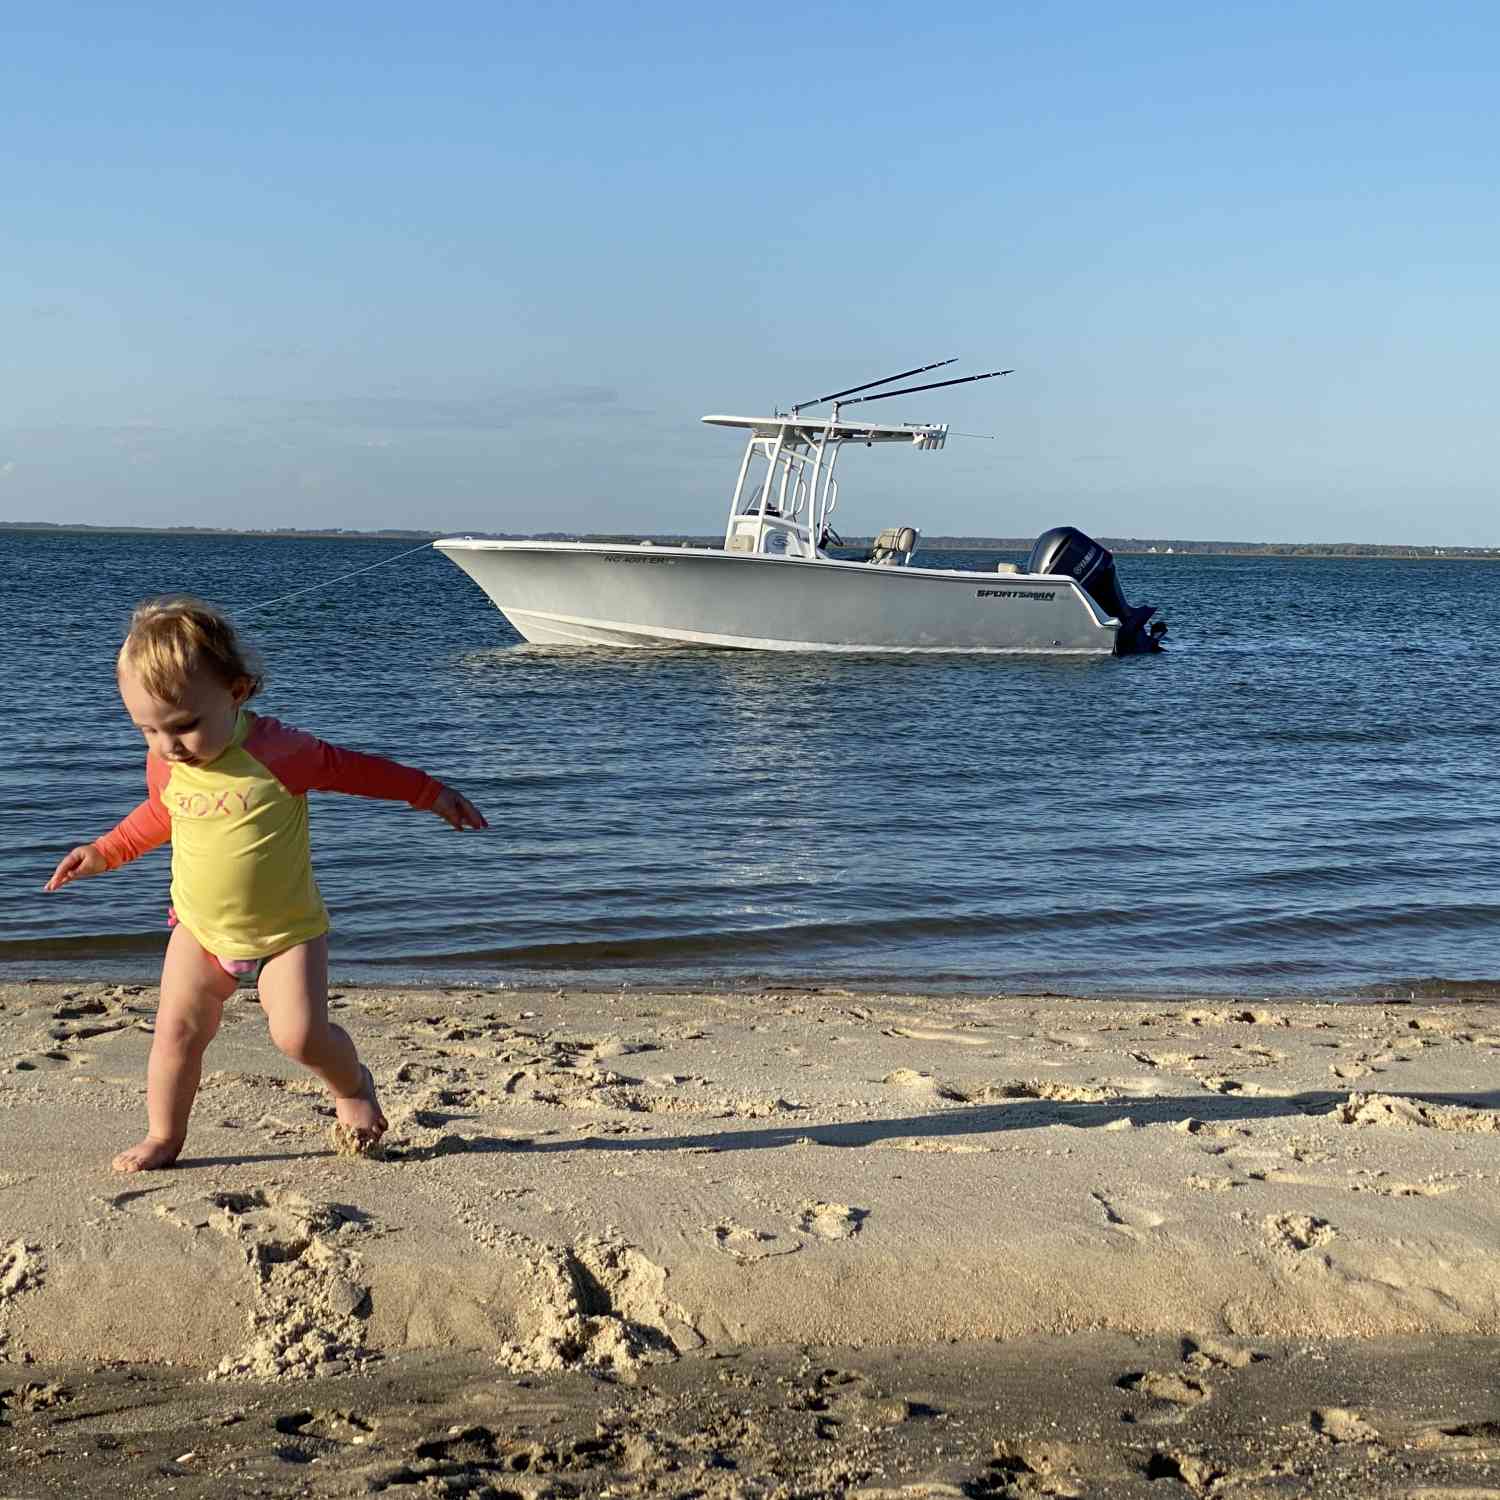 Title: Island time - On board their Sportsman Open 232 Center Console - Location: Shackleford Banks NC. Participating in the Photo Contest #SportsmanMay2021